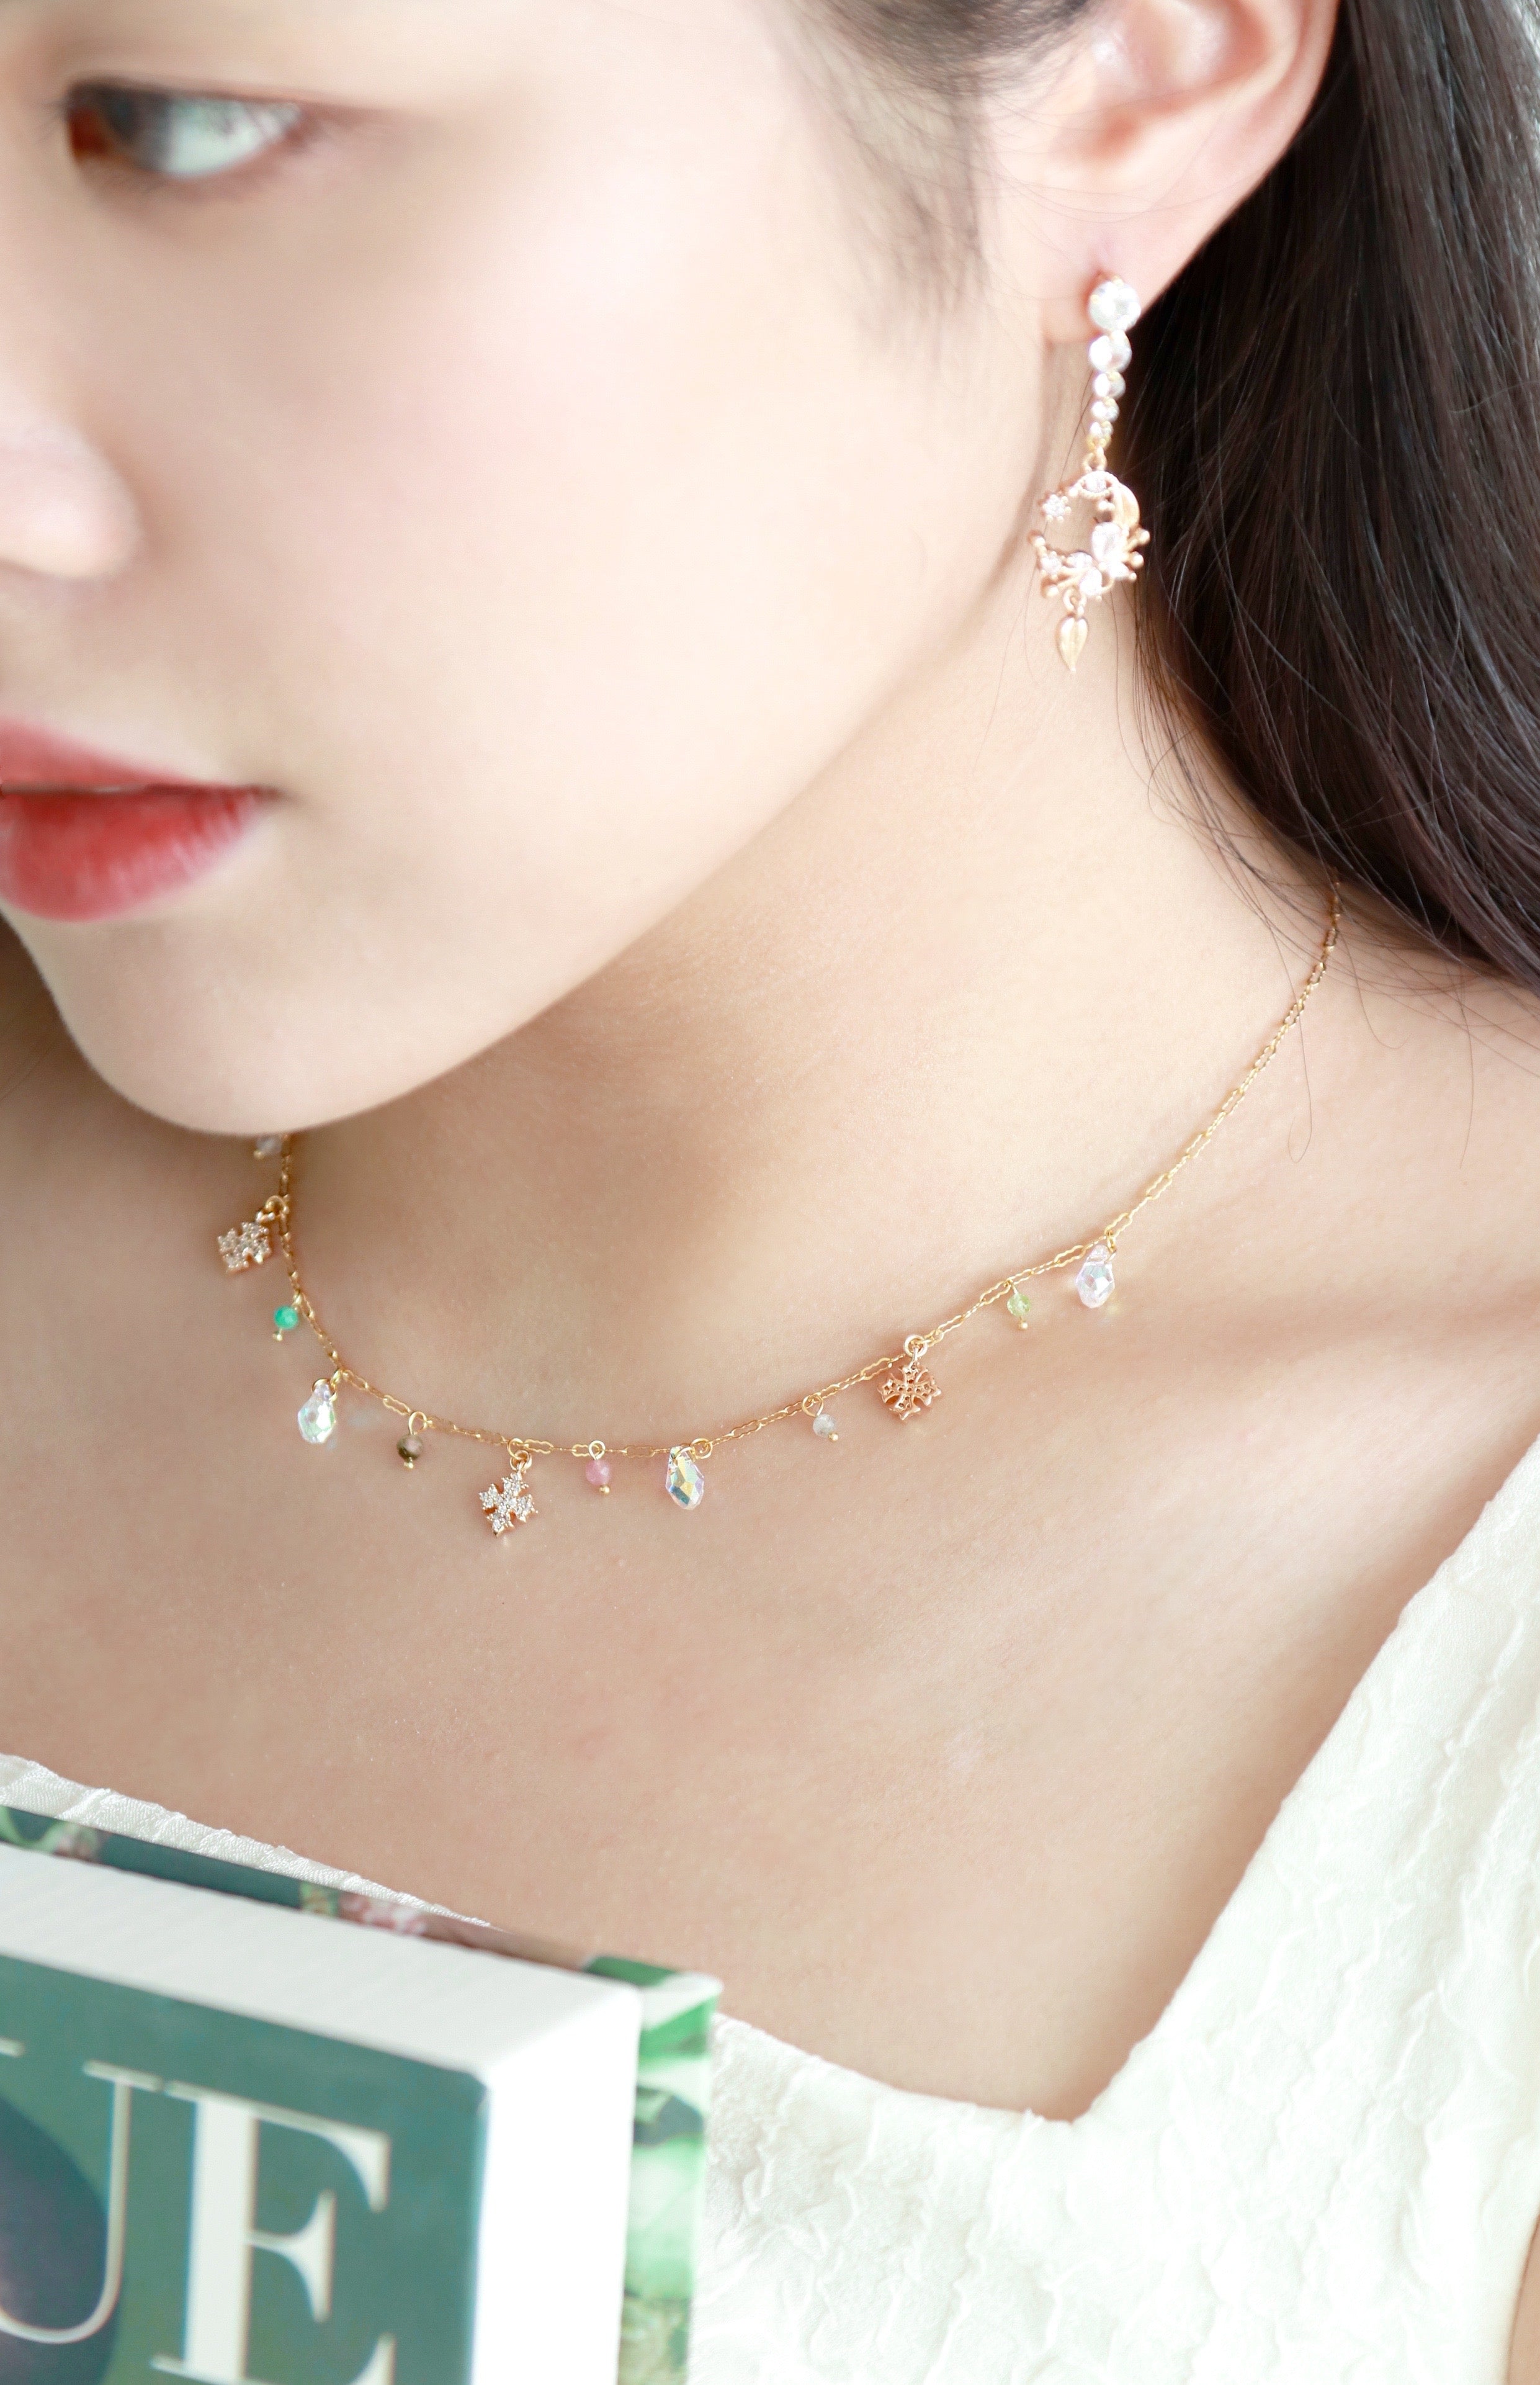 The Exquisite Open Cuff Diamond Choker Necklace | Initial Necklace